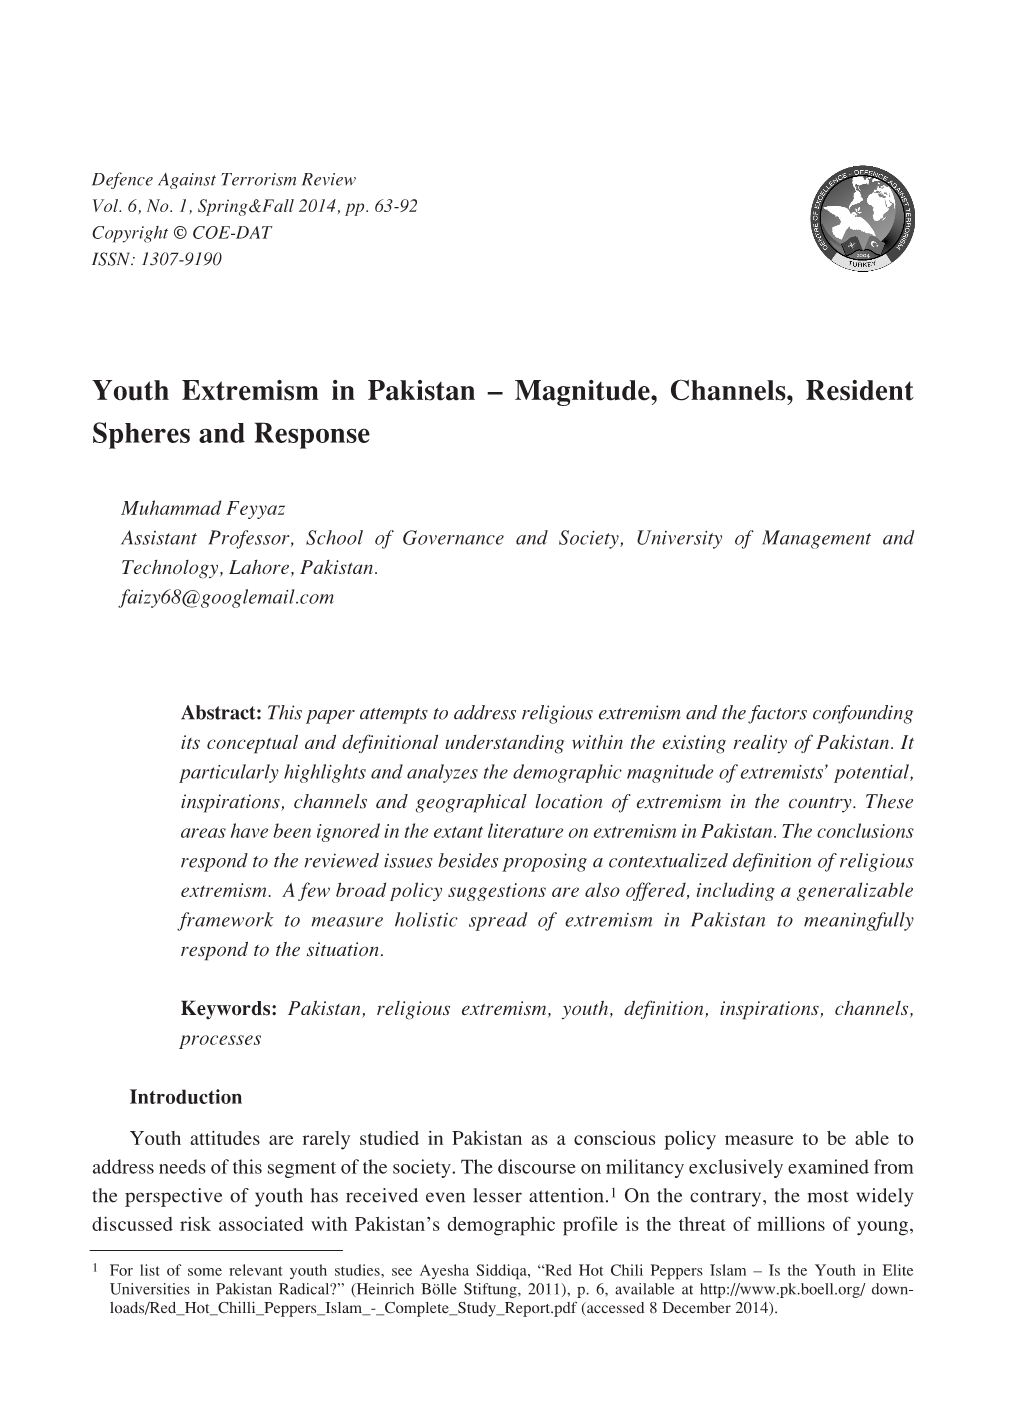 Youth Extremism in Pakistan – Magnitude, Channels, Resident Spheres and Response